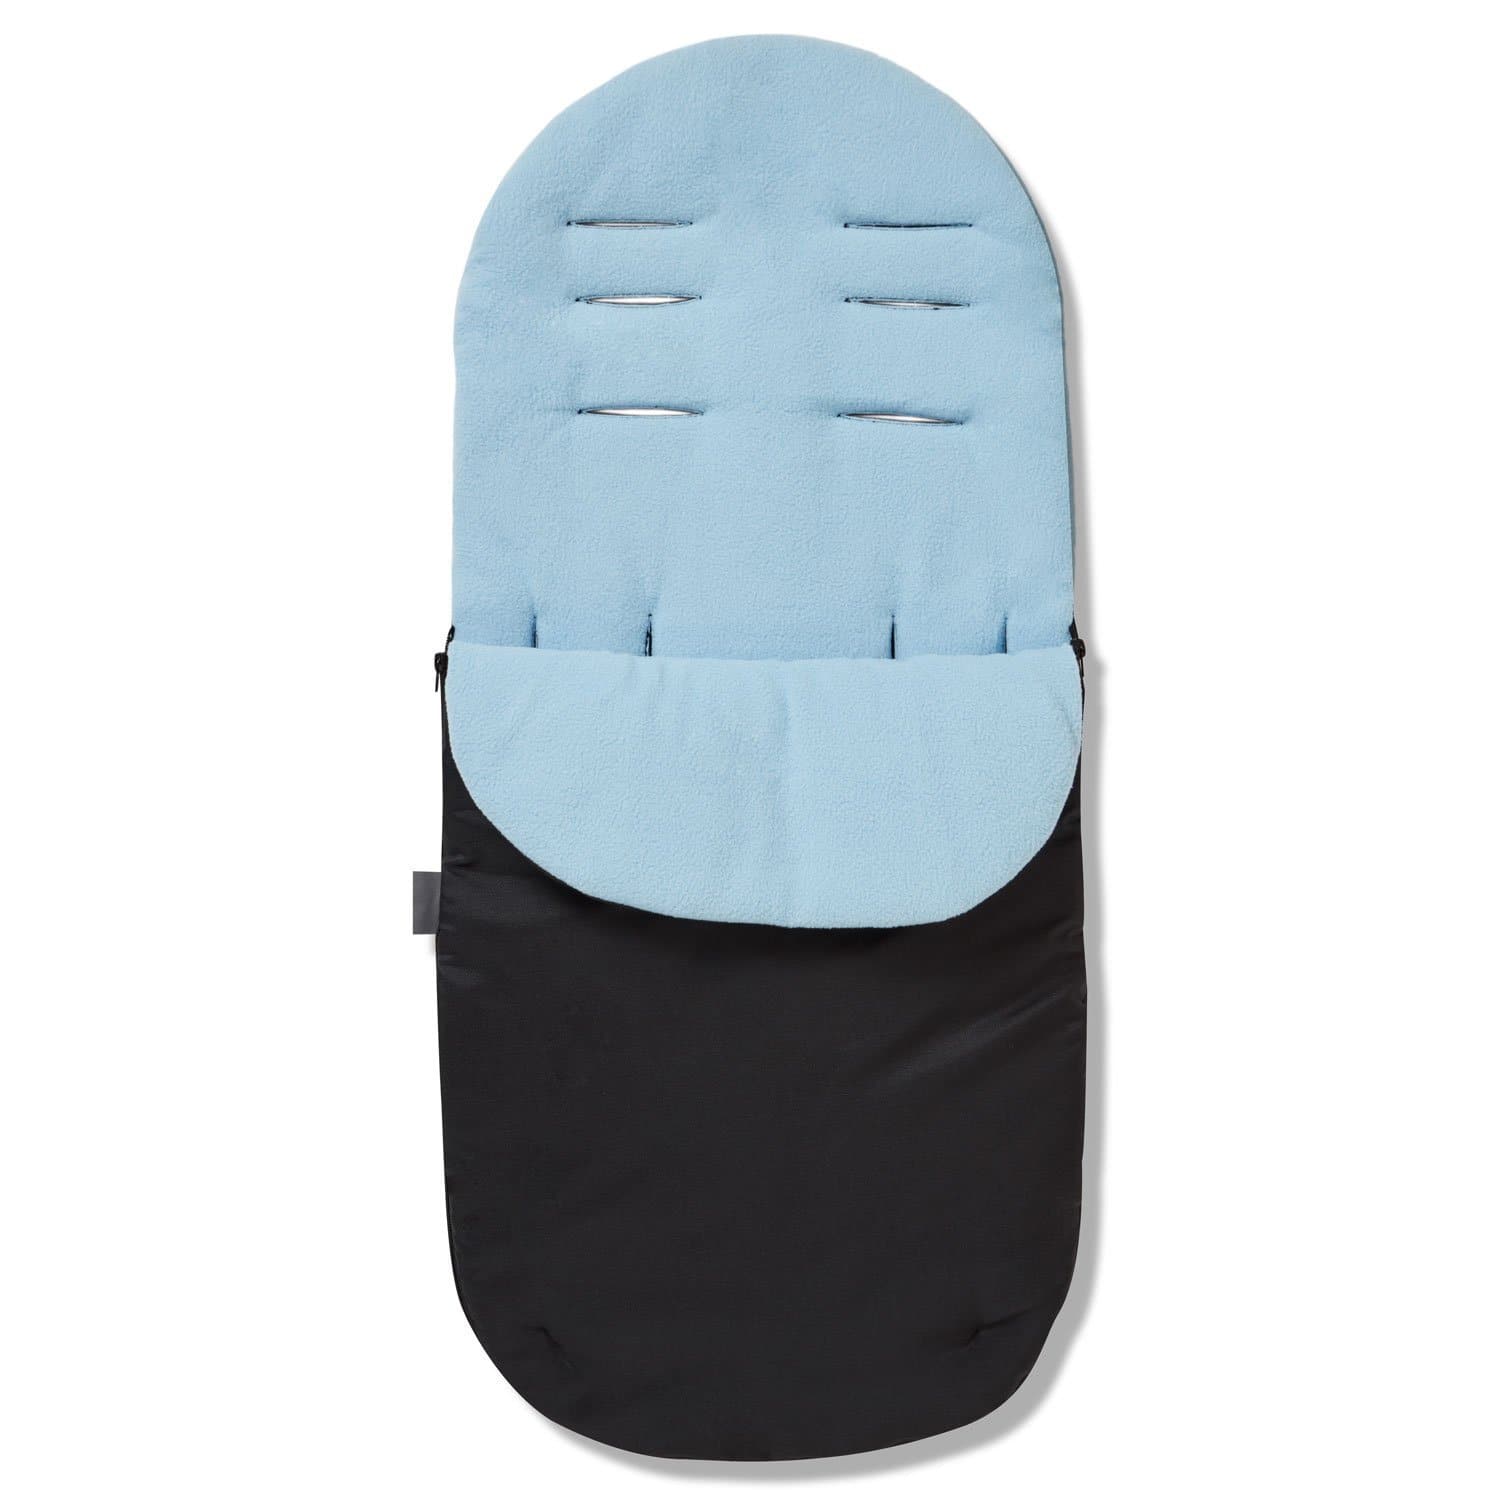 Footmuff / Cosy Toes Compatible with Ickle Bubba - Light Blue / Fits All Models | For Your Little One